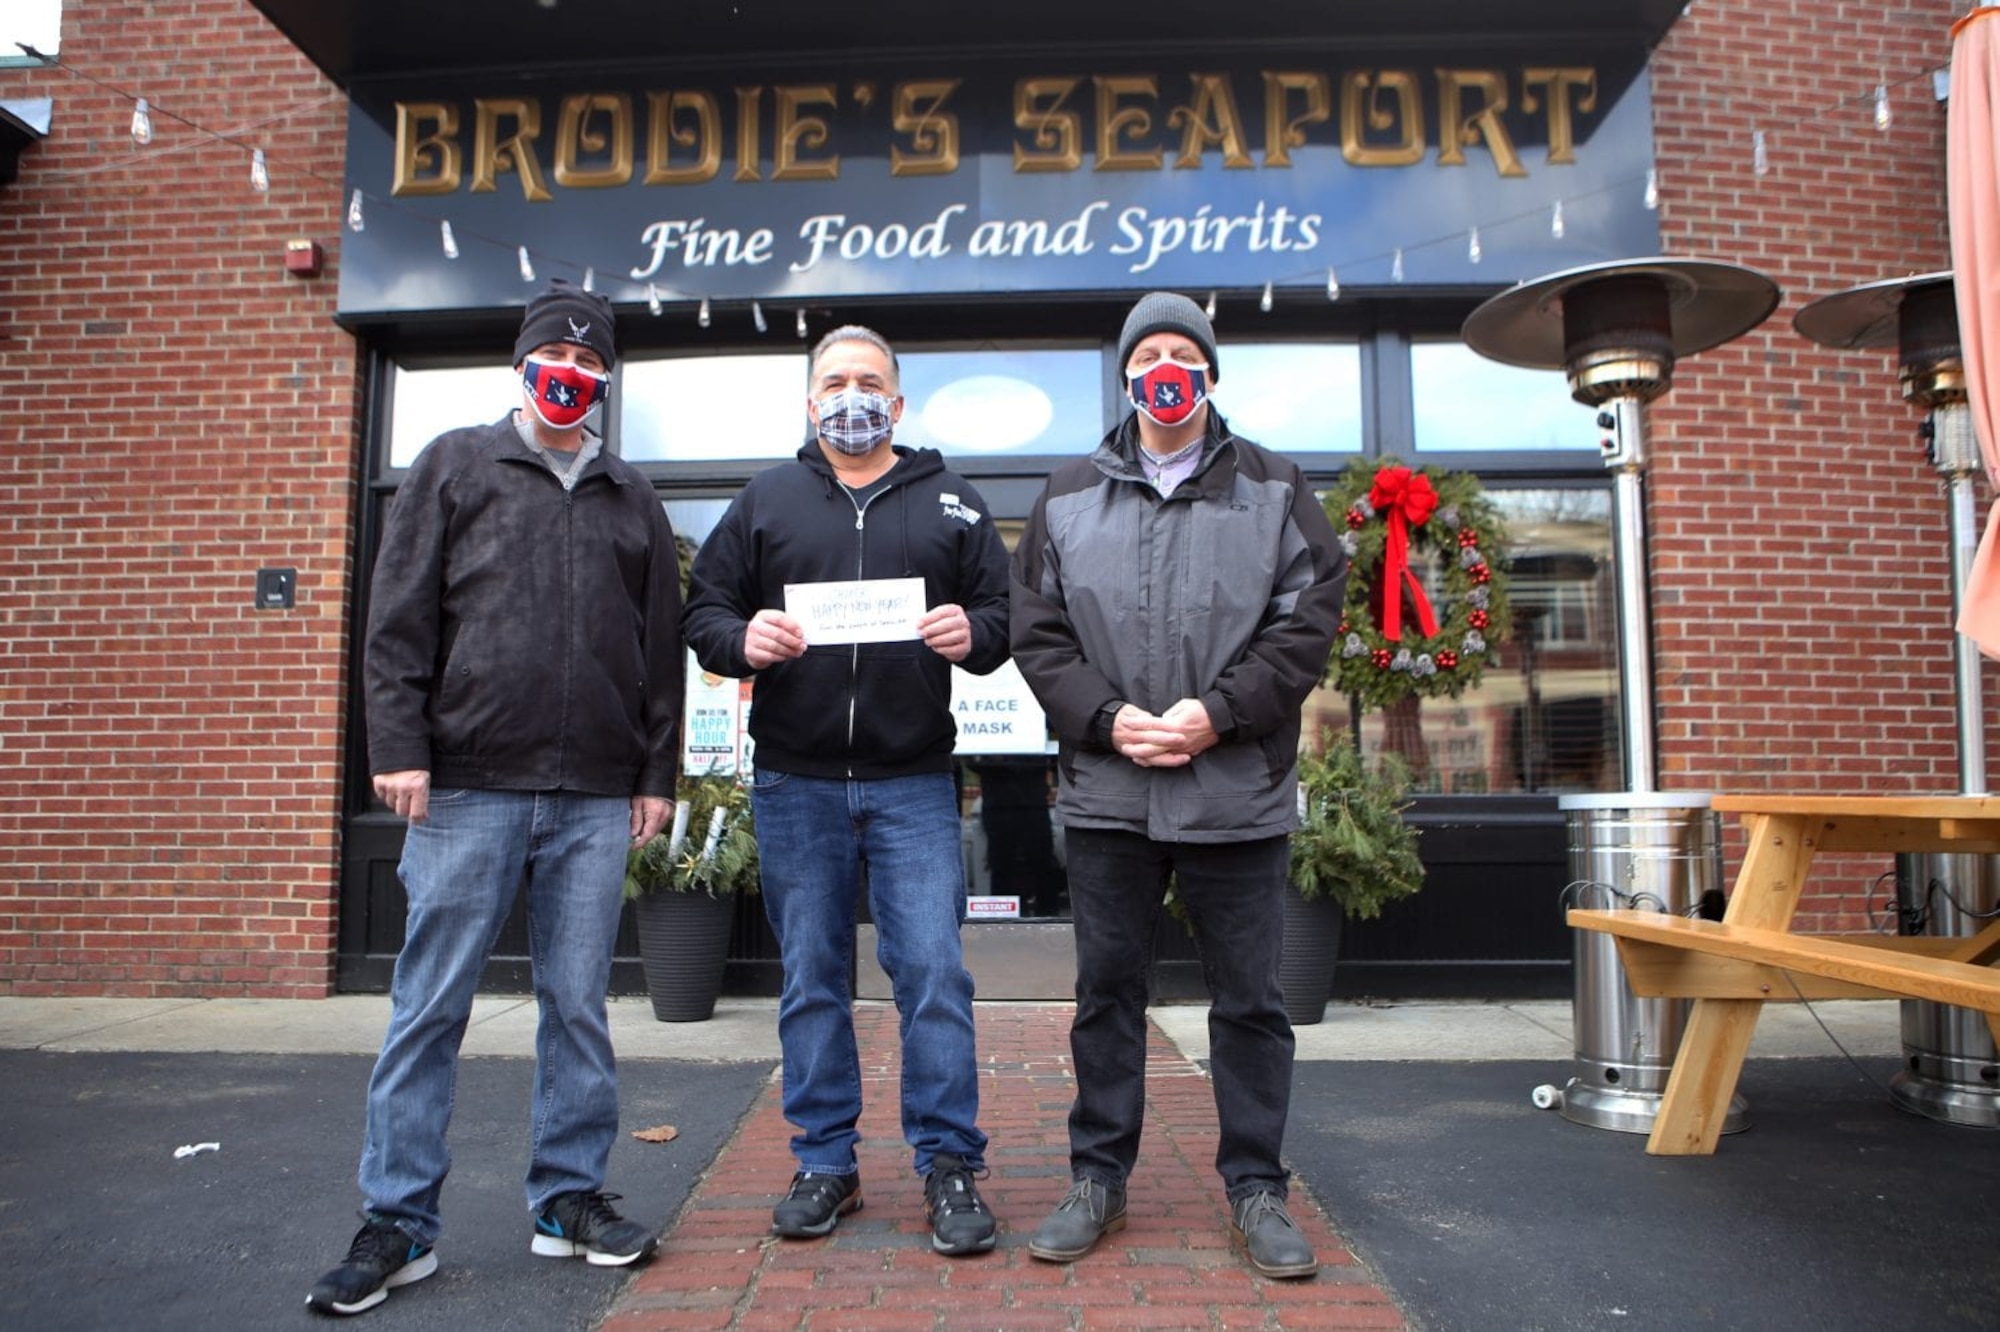 Scott Sheehan, left, 66th Civil Engineering Division environmental engineer, presents a $100 donation to Brodie’s Seaport bartender Chuck Rollins alongside local resident Mark Roberts in Salem, Mass., Jan. 18. Sheehan and Roberts have raised more than $7,500 for Salem restaurant managers, servers and bartenders. (Courtesy photo by Olivia Falcigno/The Daily Item)